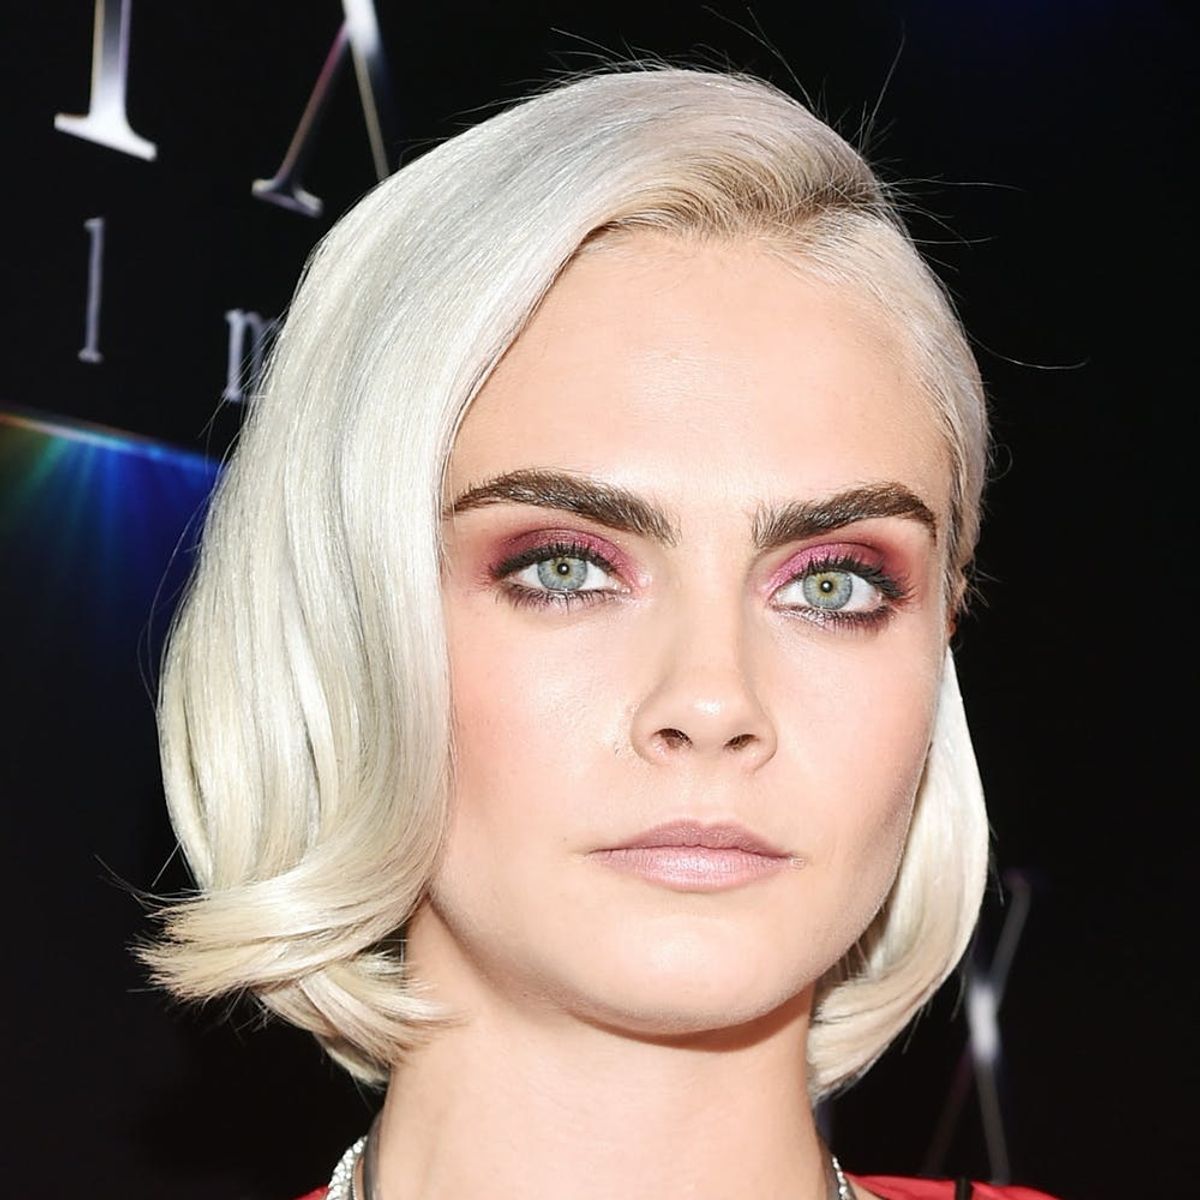 Cara Delevingne Is Giving Katy Perry a Run for Her Money With Her Newly Shaved ‘Do